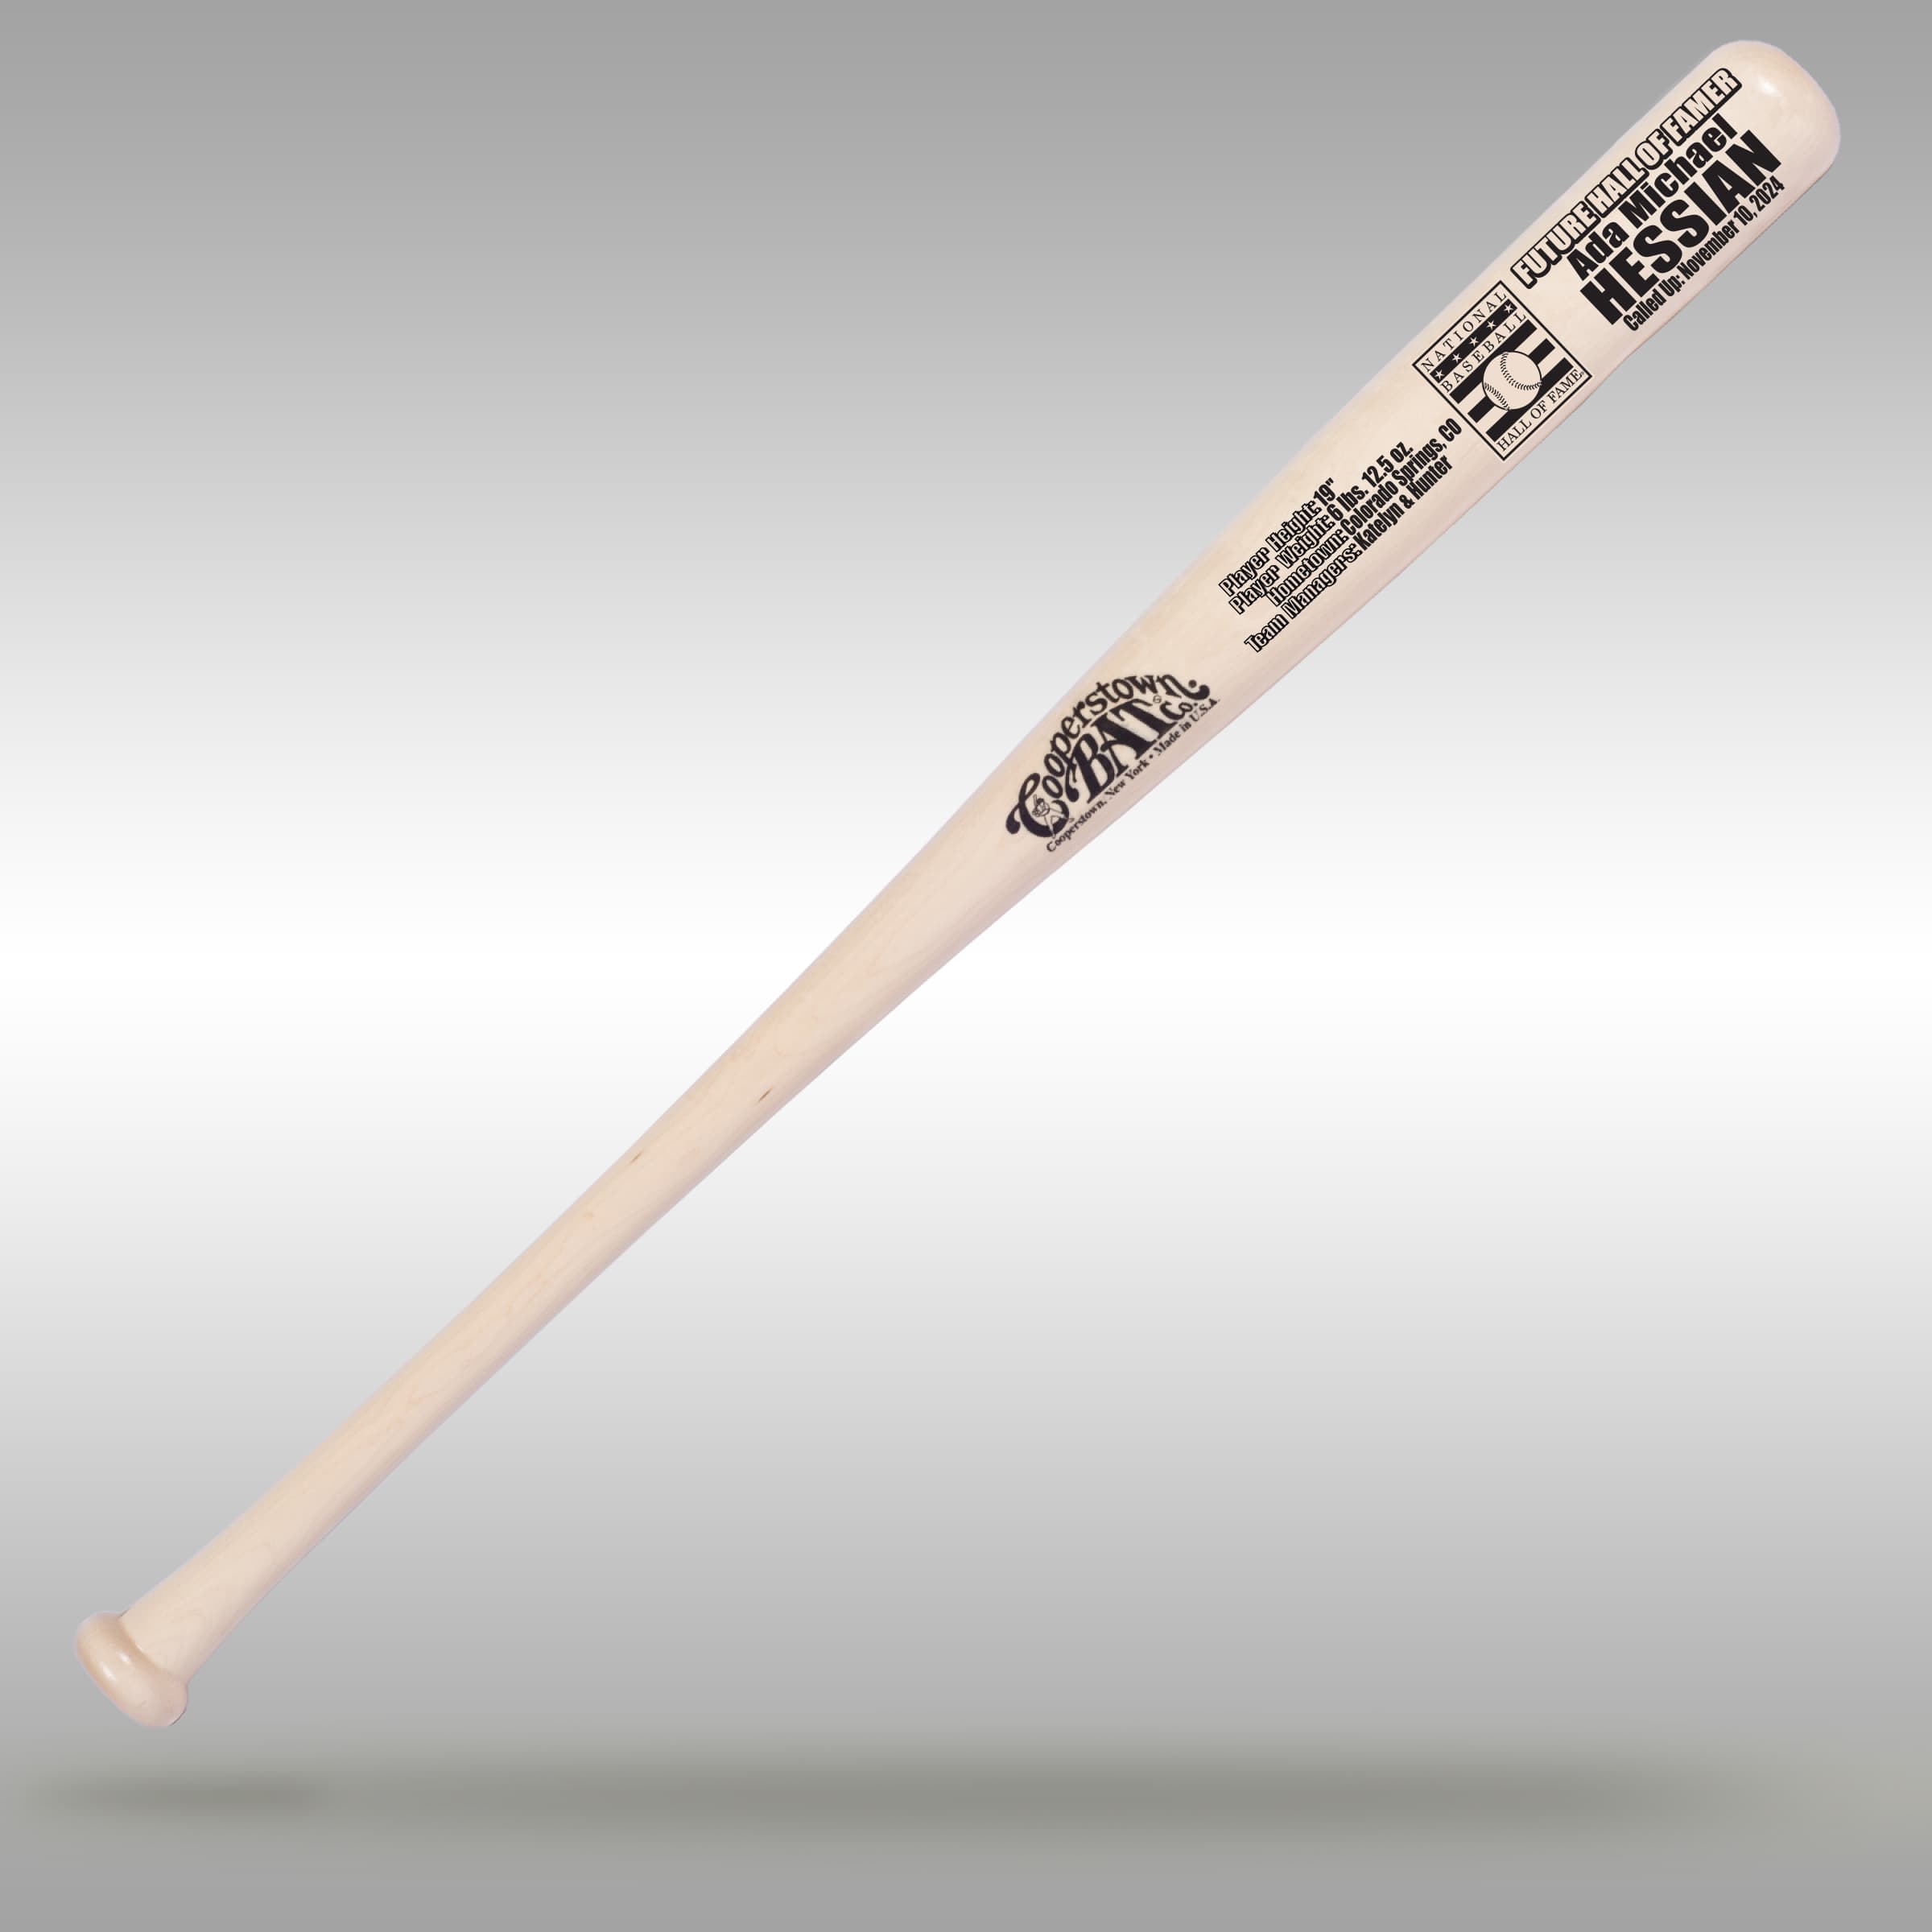 What is a baseball bat made of? How long is it? How much does it weigh? -  AS USA